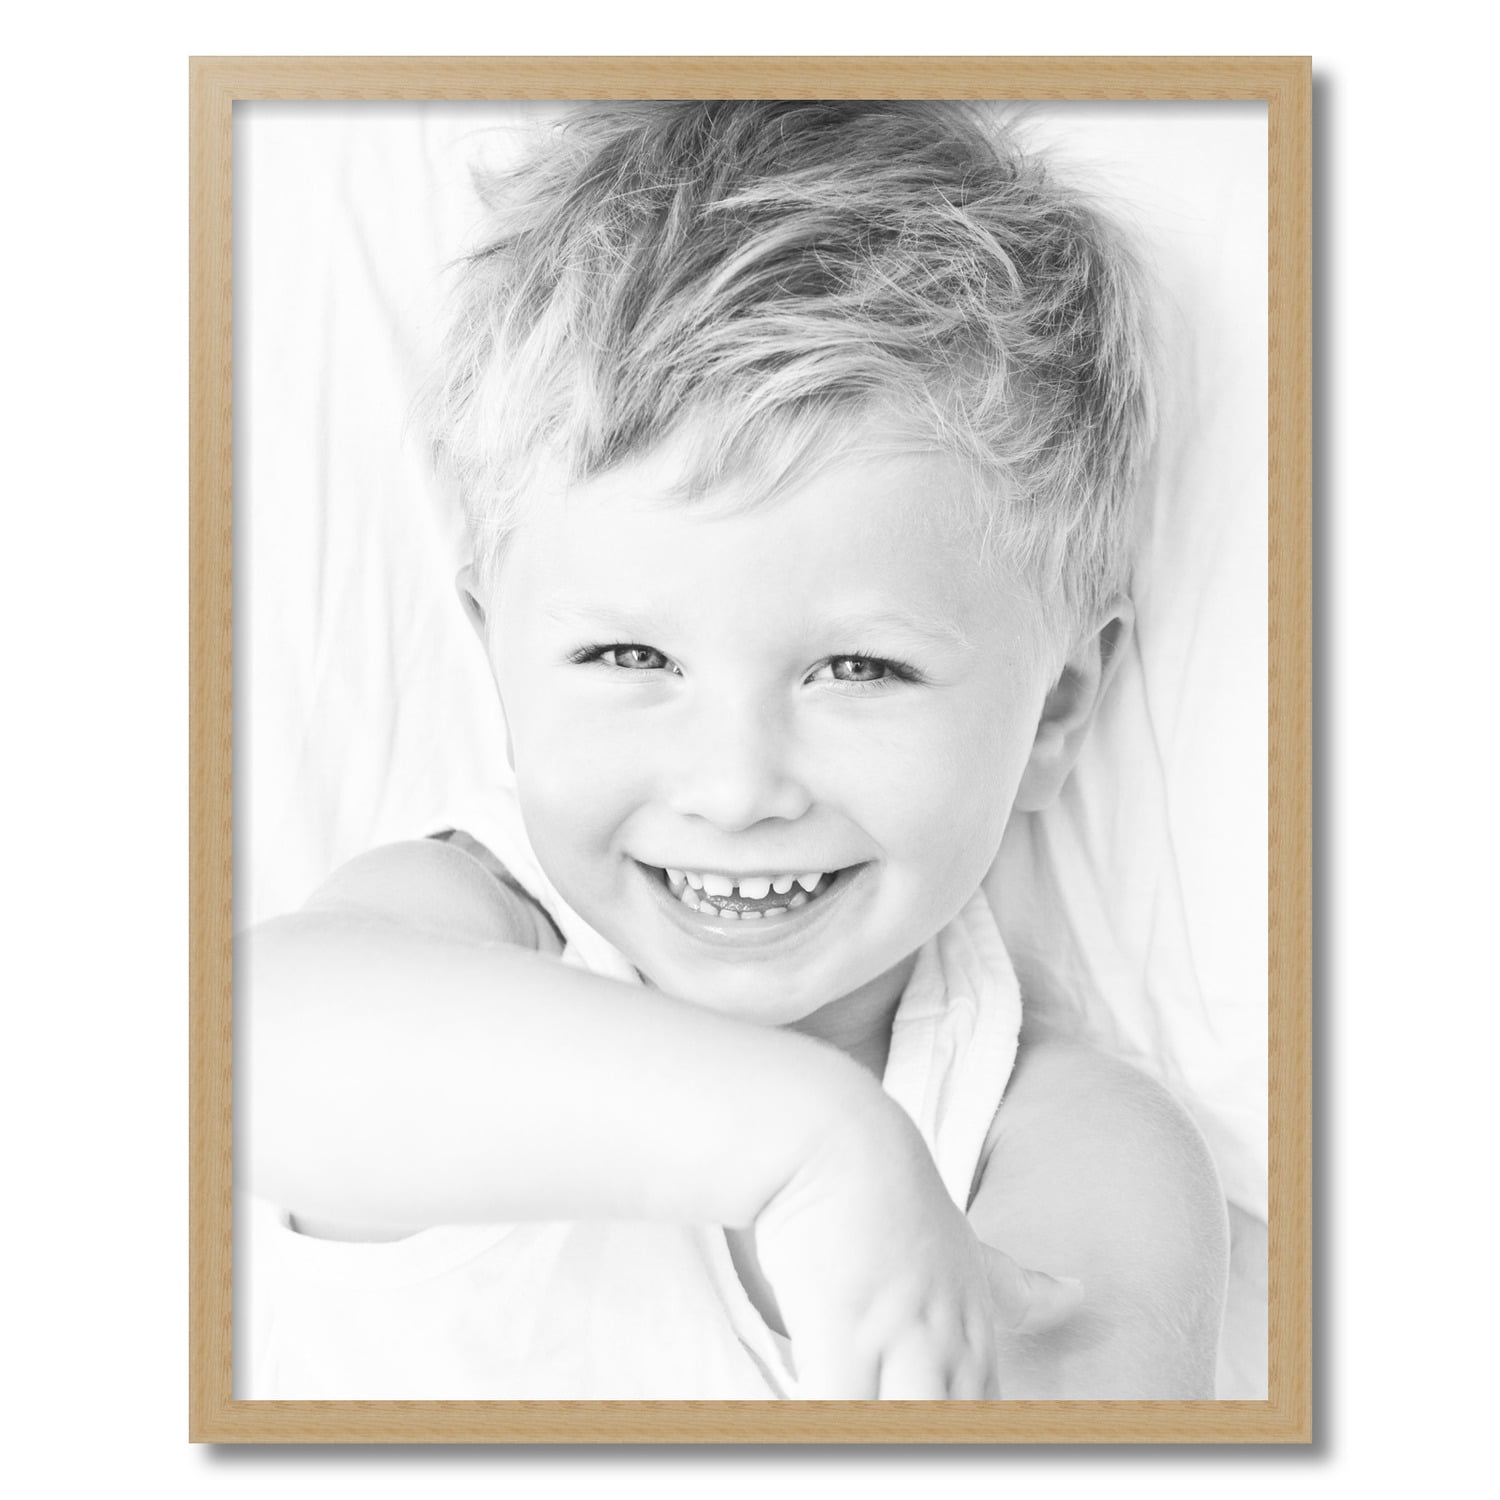  ArtToFrames 24x30 Inch White Picture Frame, This 1.25 Custom  Poster Frame is Satin White Frame, for Your Art or Photos,  WOMFRBW26074-24x30 - Single Frames